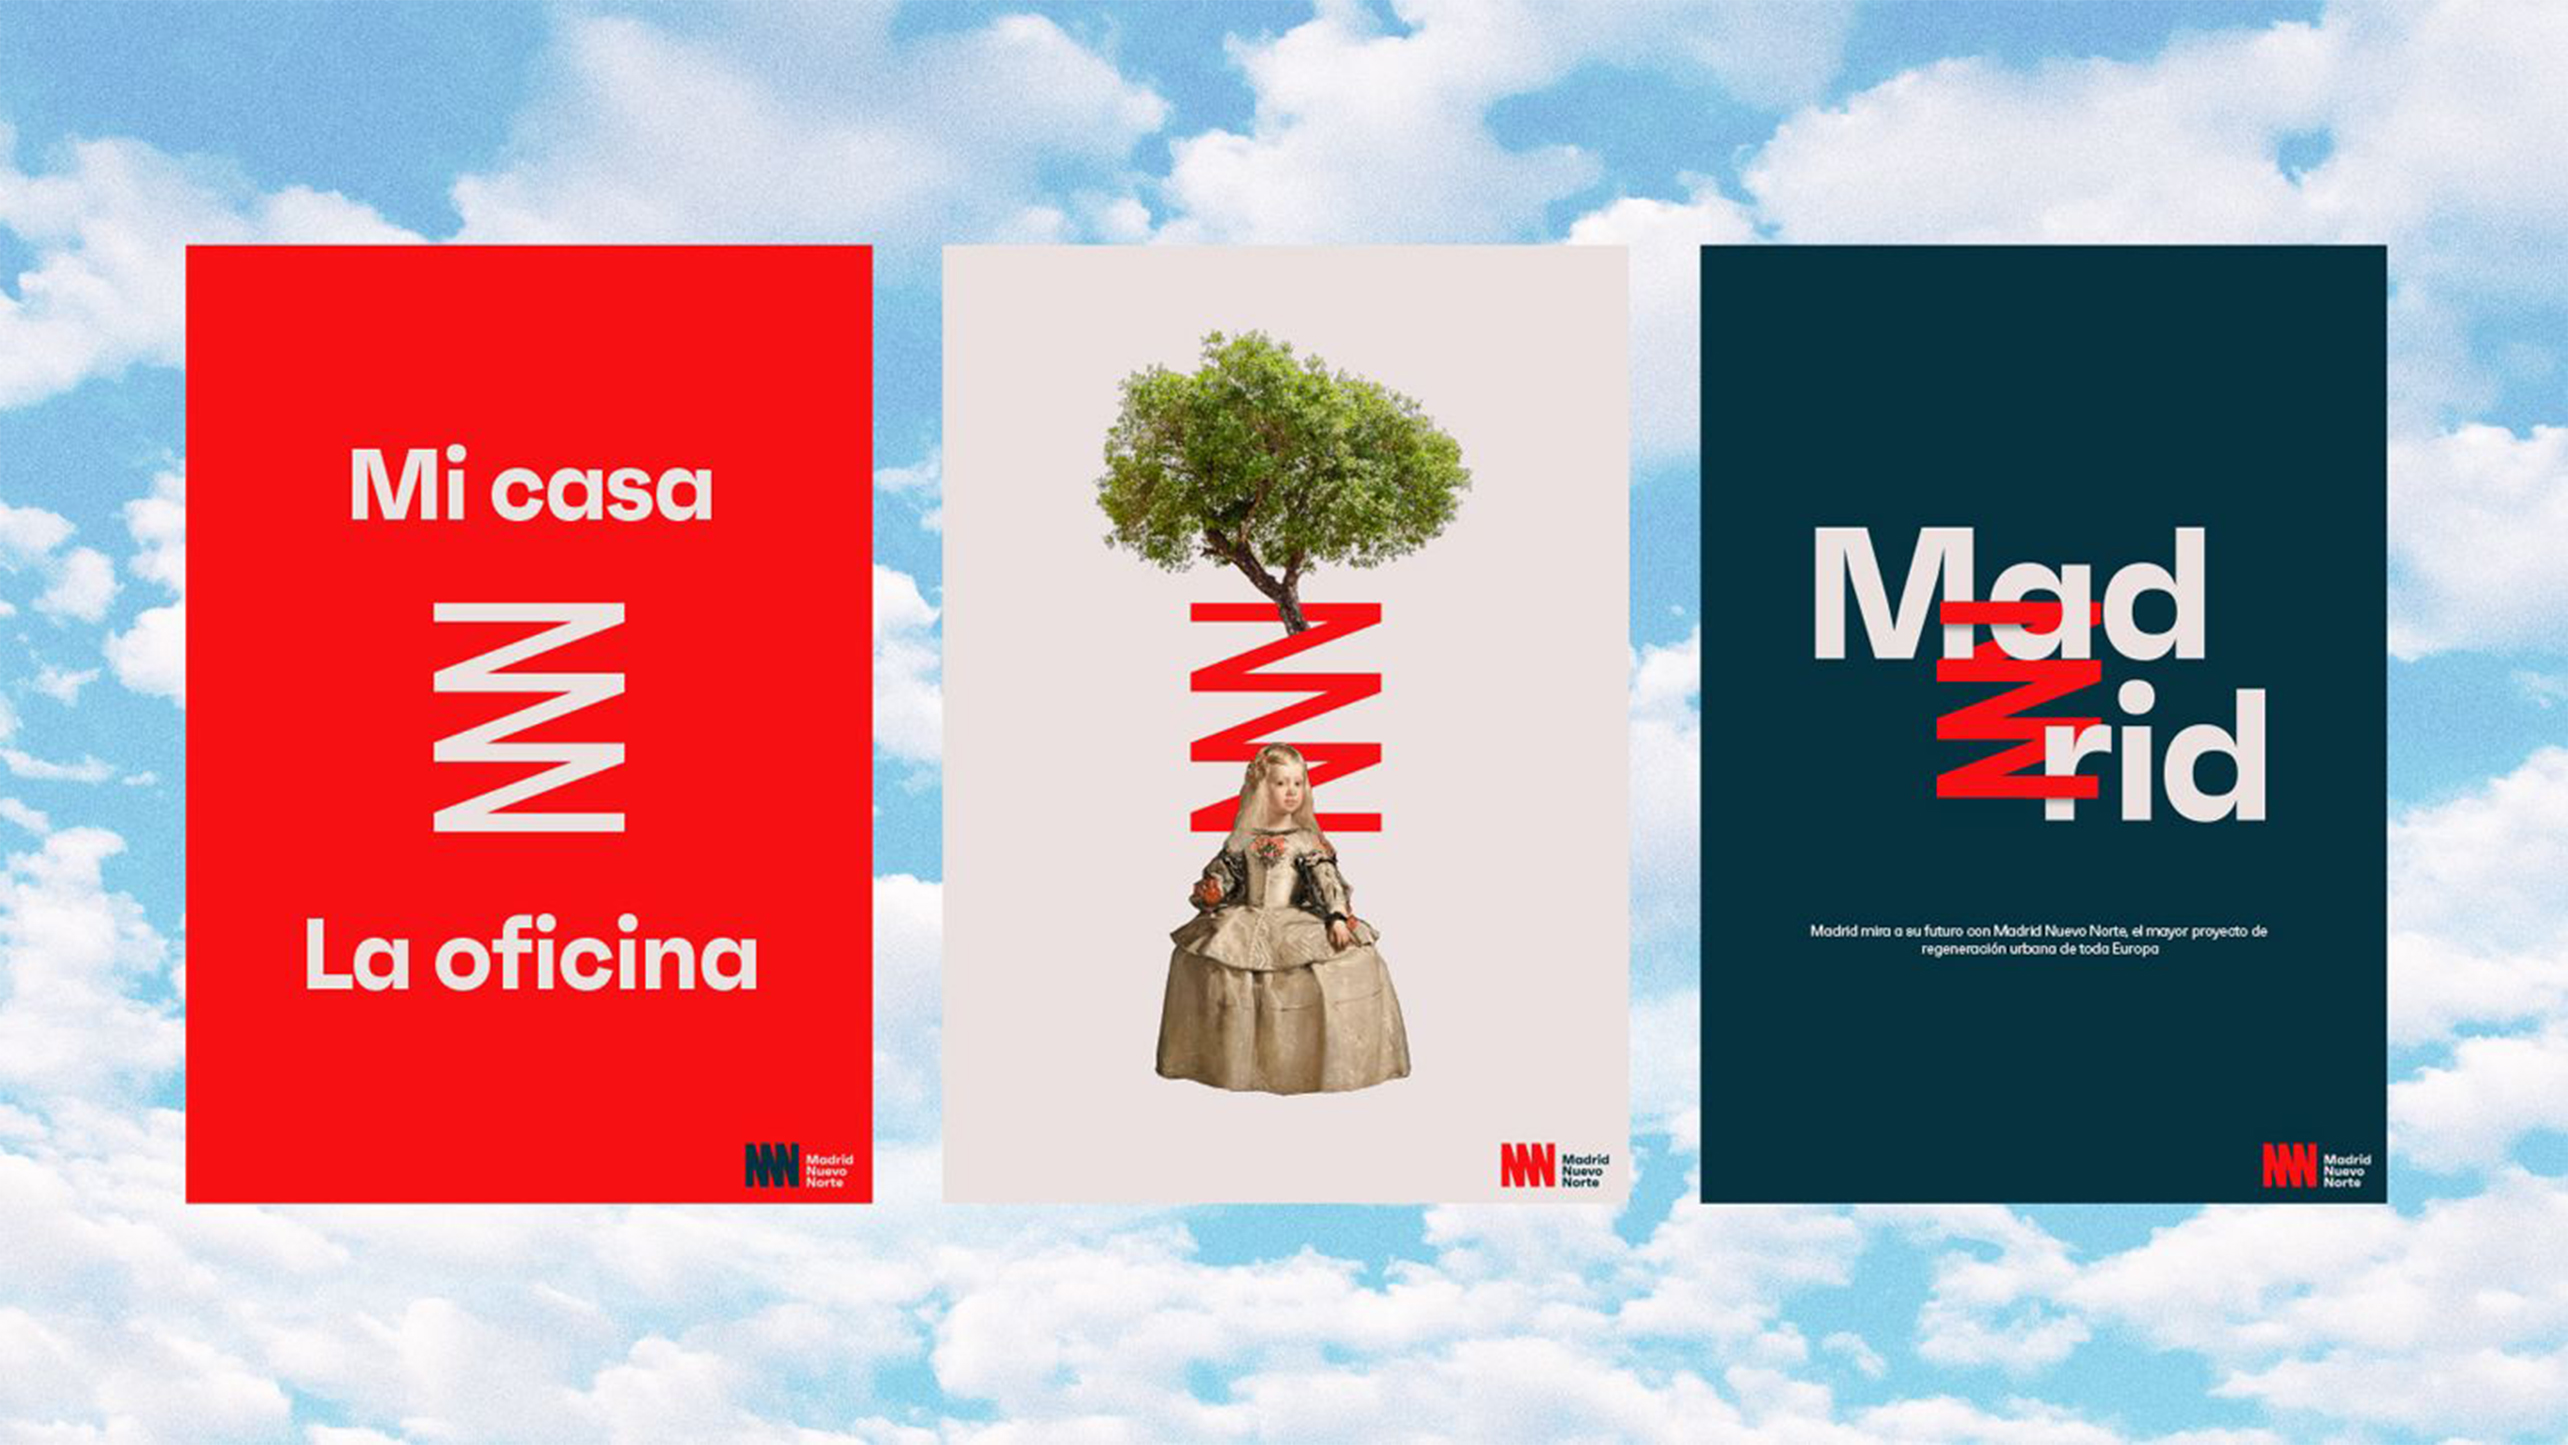 Posters for Madrid